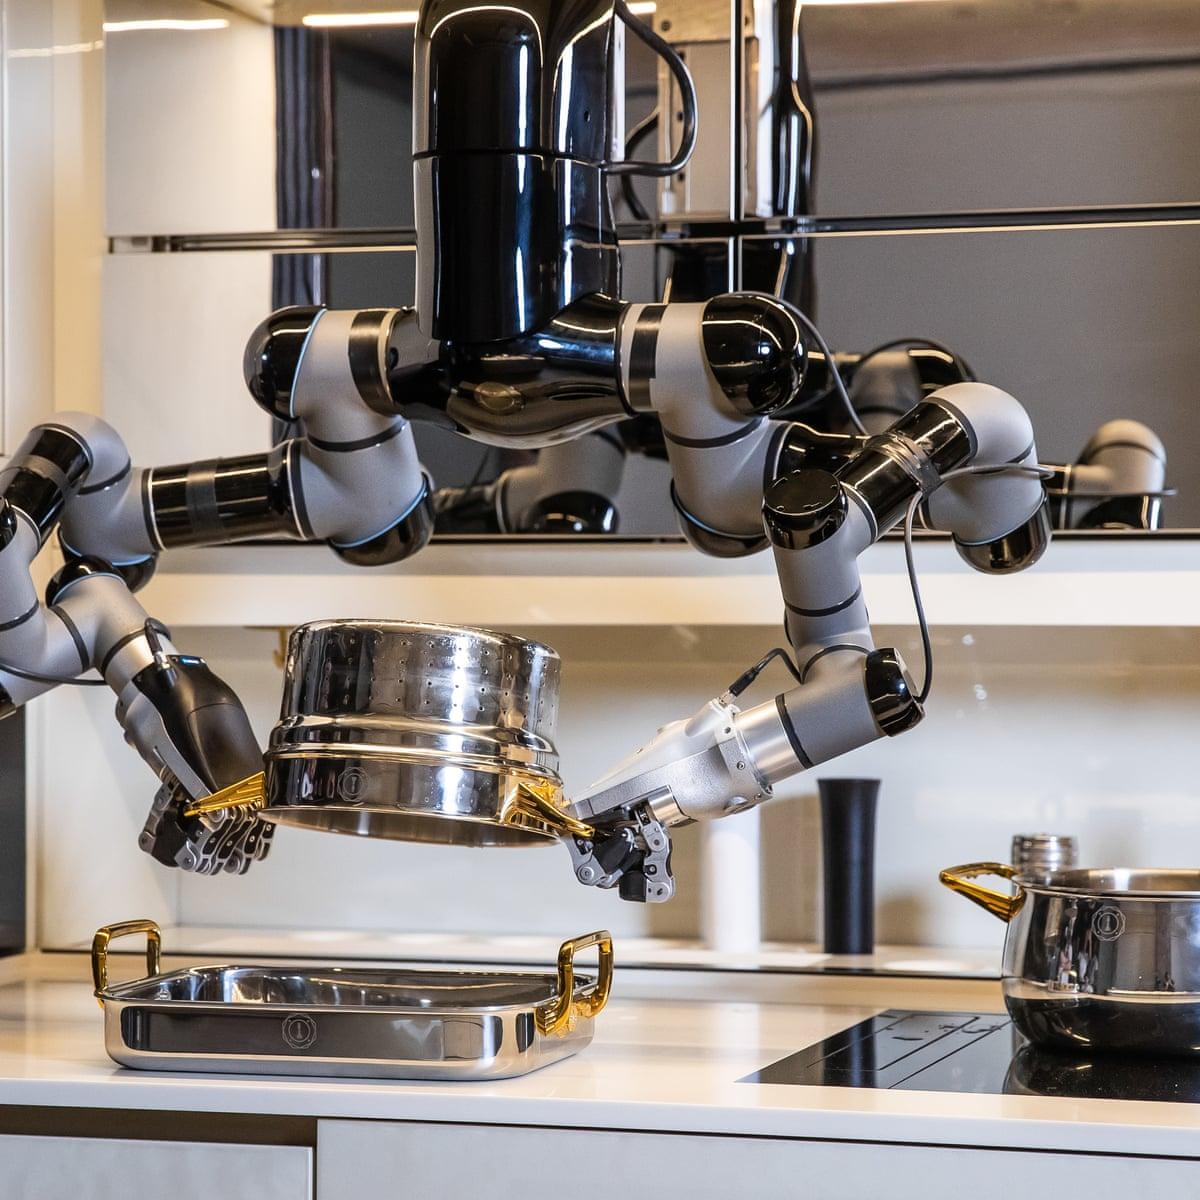 This 330,000 Kitchen robot will make you a tasty meal and even do the